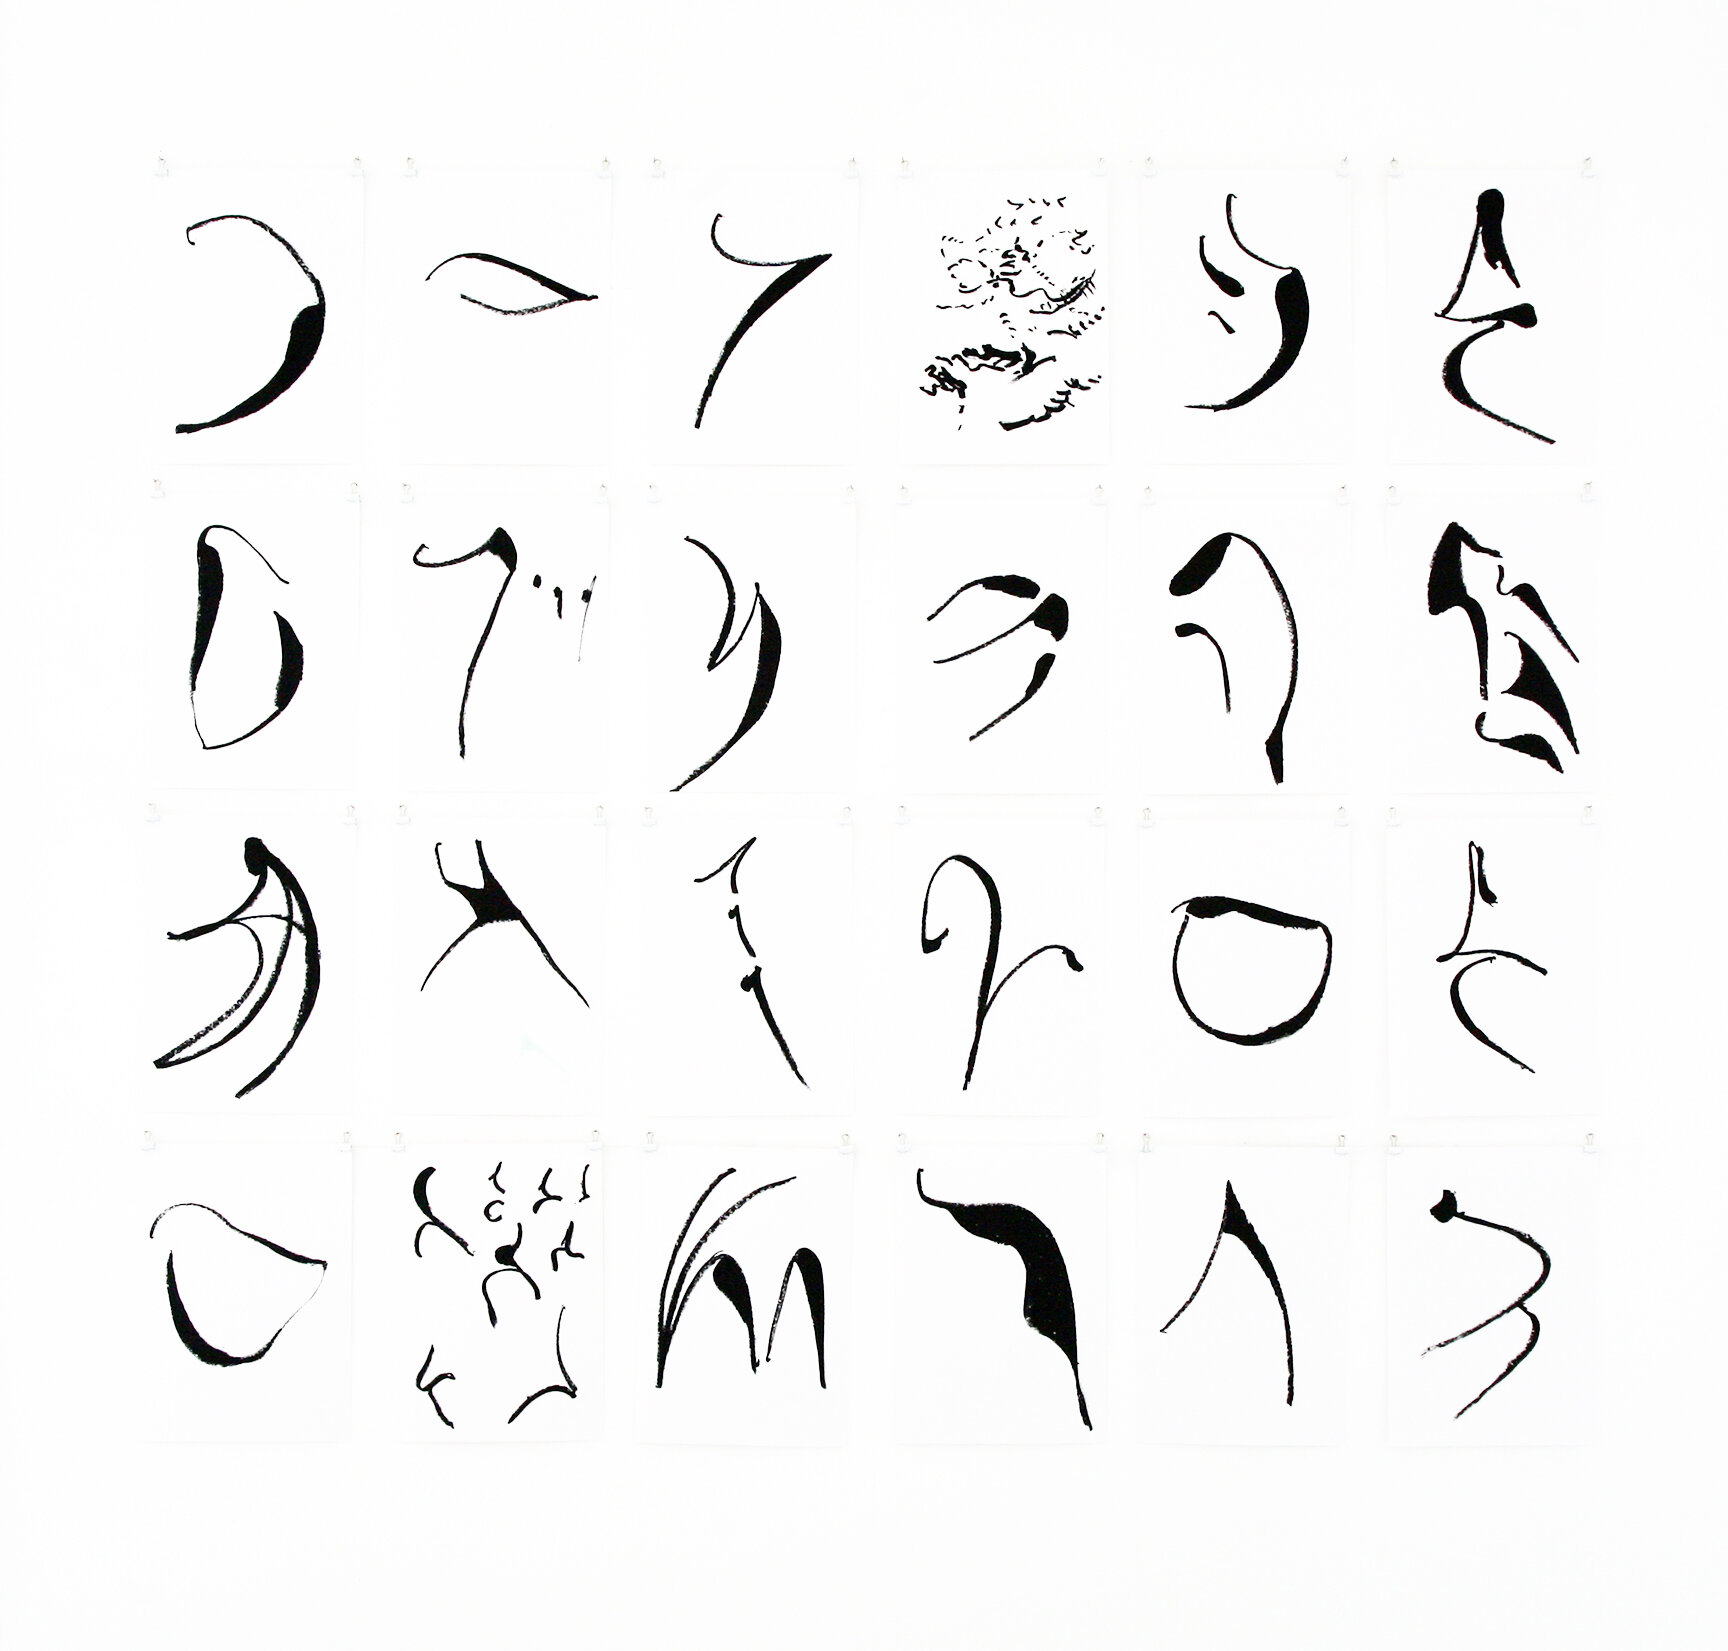 Stone Alphabet, 2019, oil stick on paper, 24 drawings 